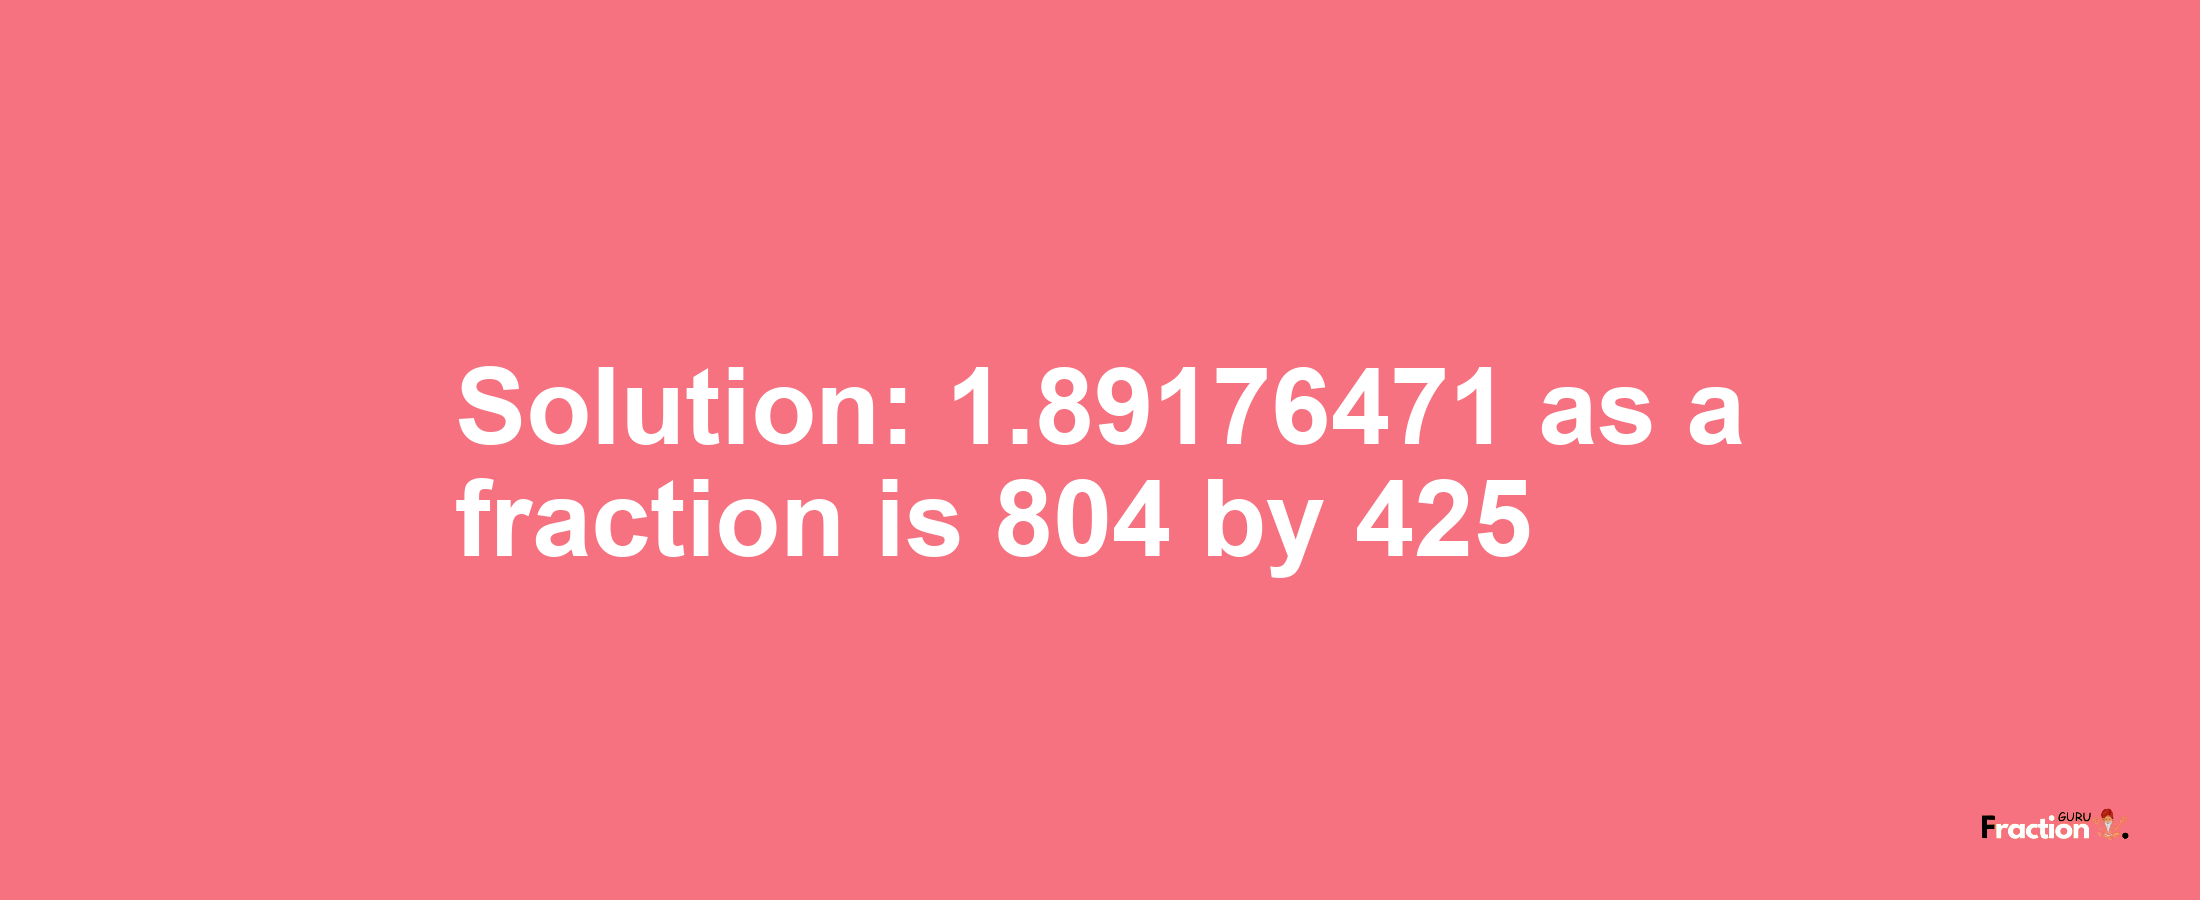 Solution:1.89176471 as a fraction is 804/425